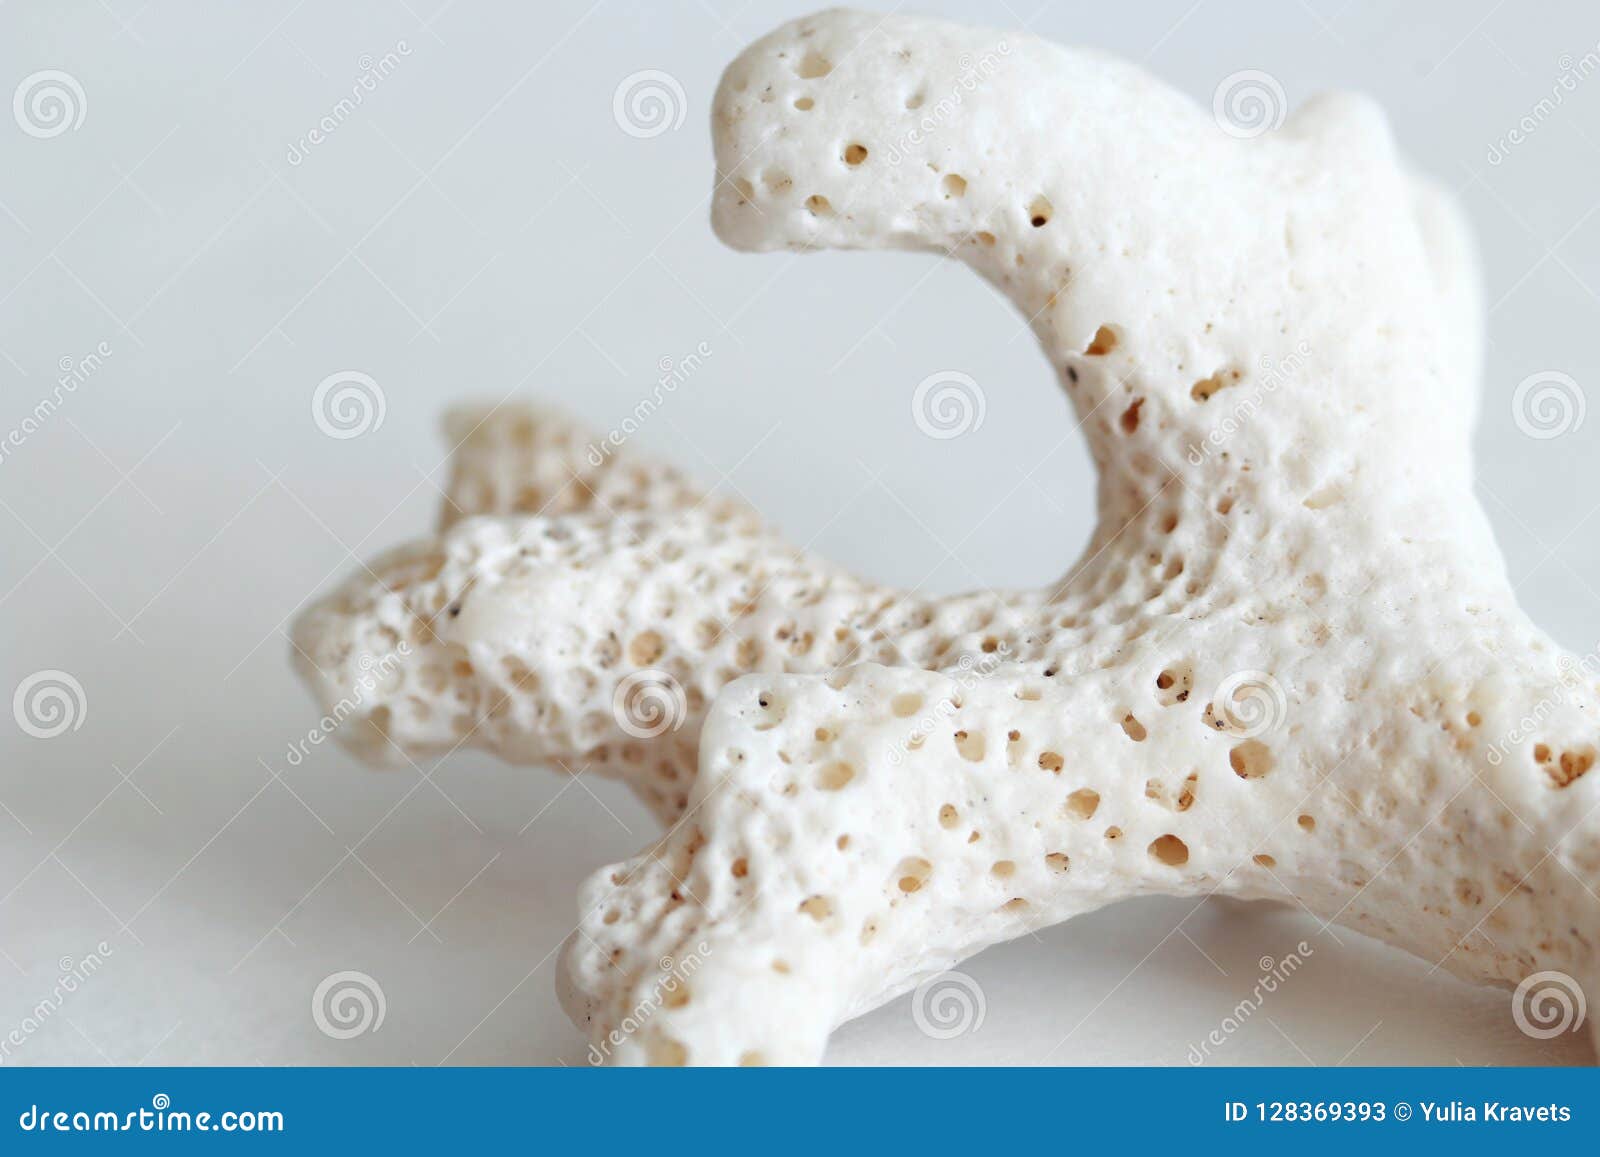 https://thumbs.dreamstime.com/z/zoom-macro-beautiful-photo-background-sprig-dried-sea-coral-structure-white-128369393.jpg